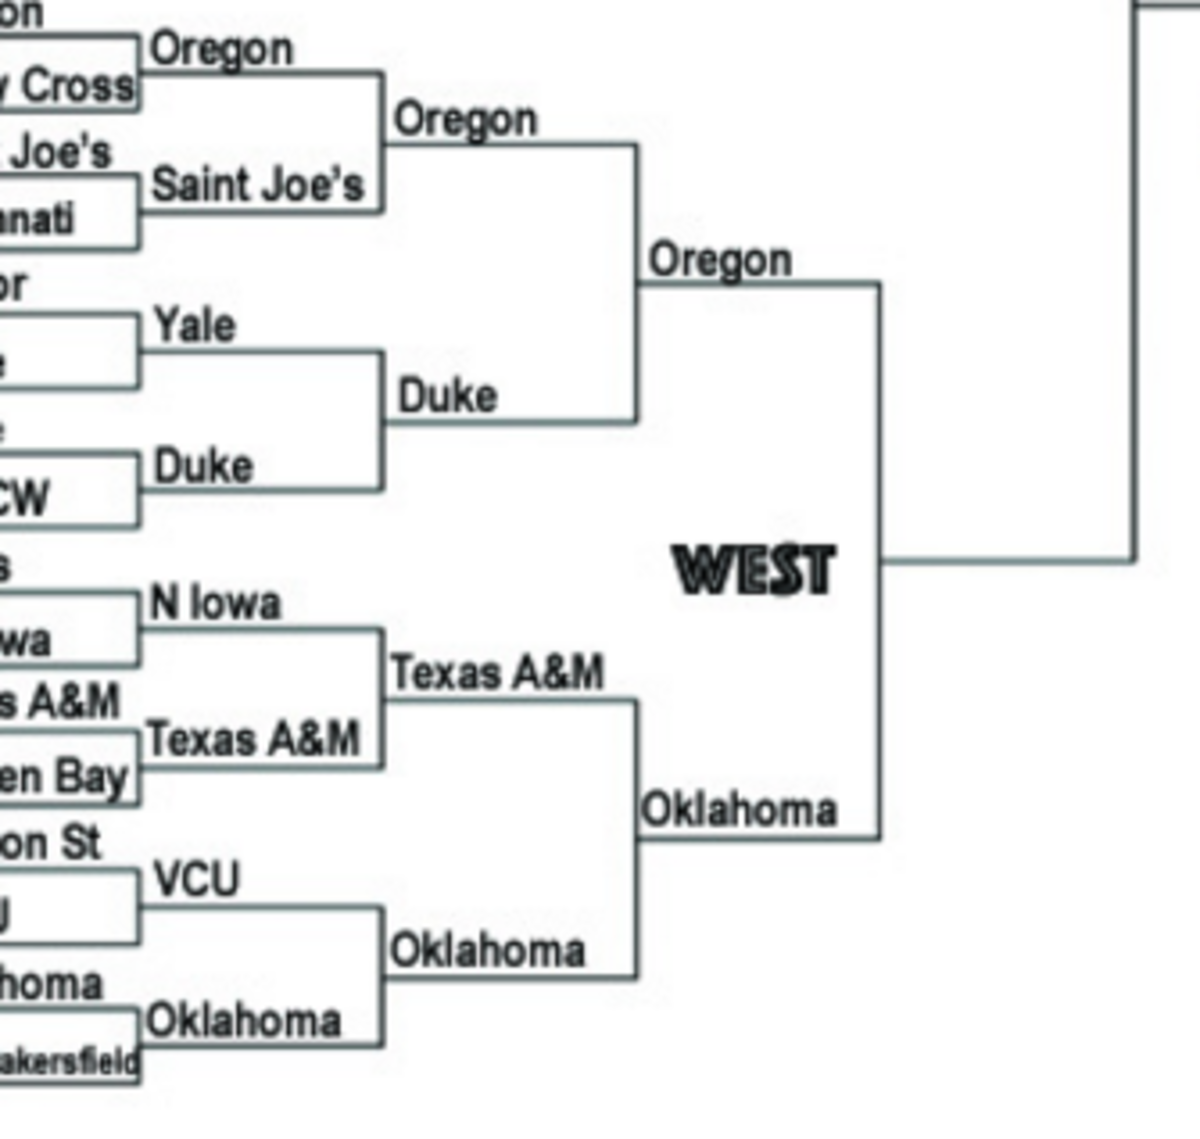 Oregon and Oklahoma matched up in the West bracket.